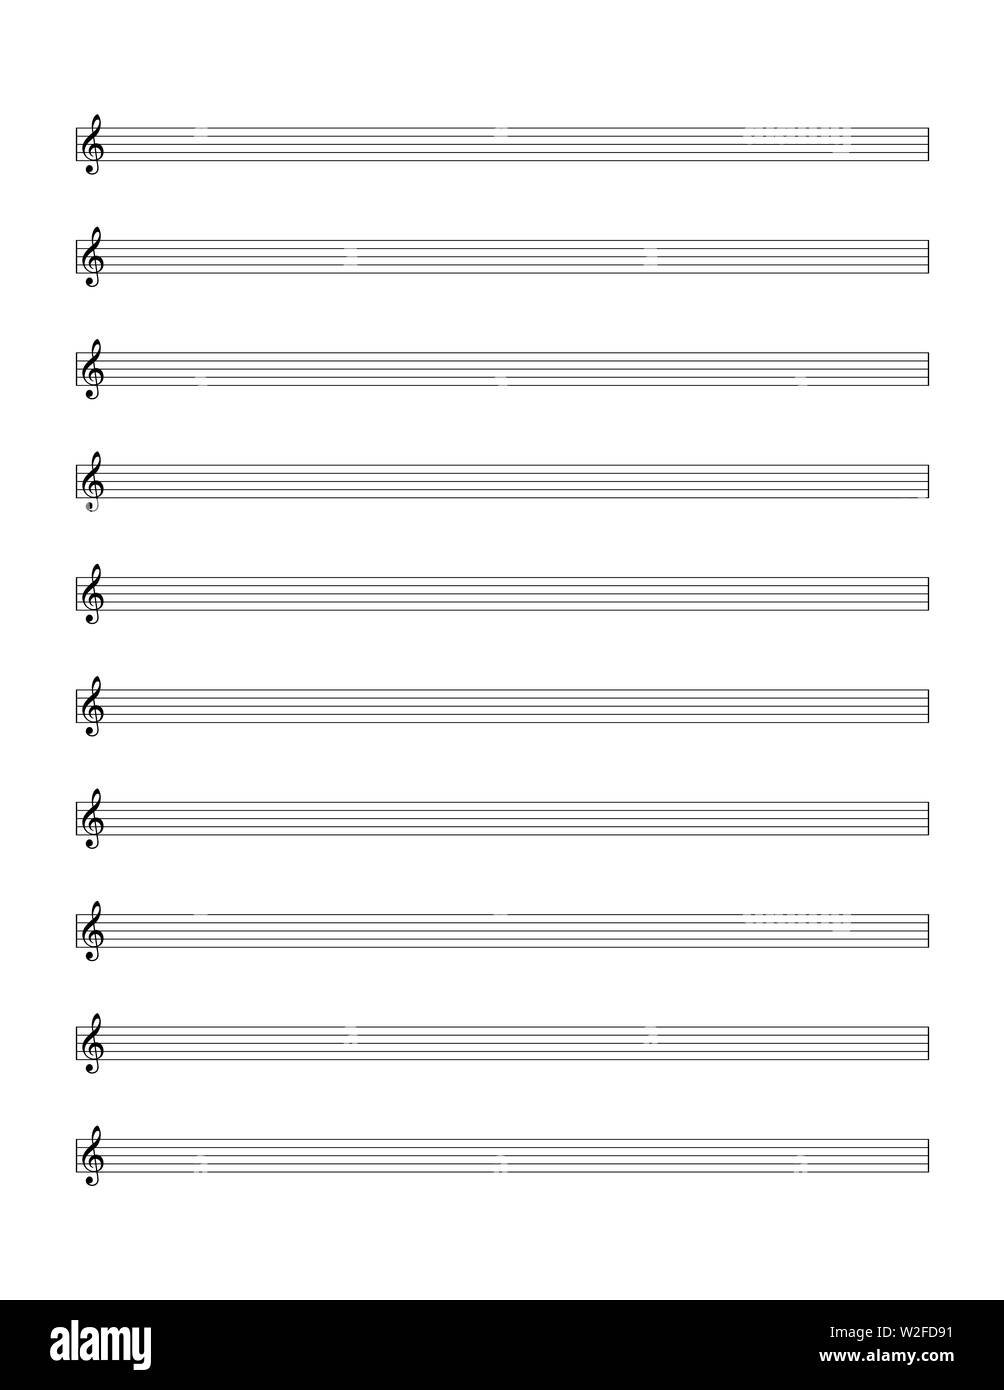 Empty sheet of notes template. Five-line staff with treble clef In Music Notes Paper Template